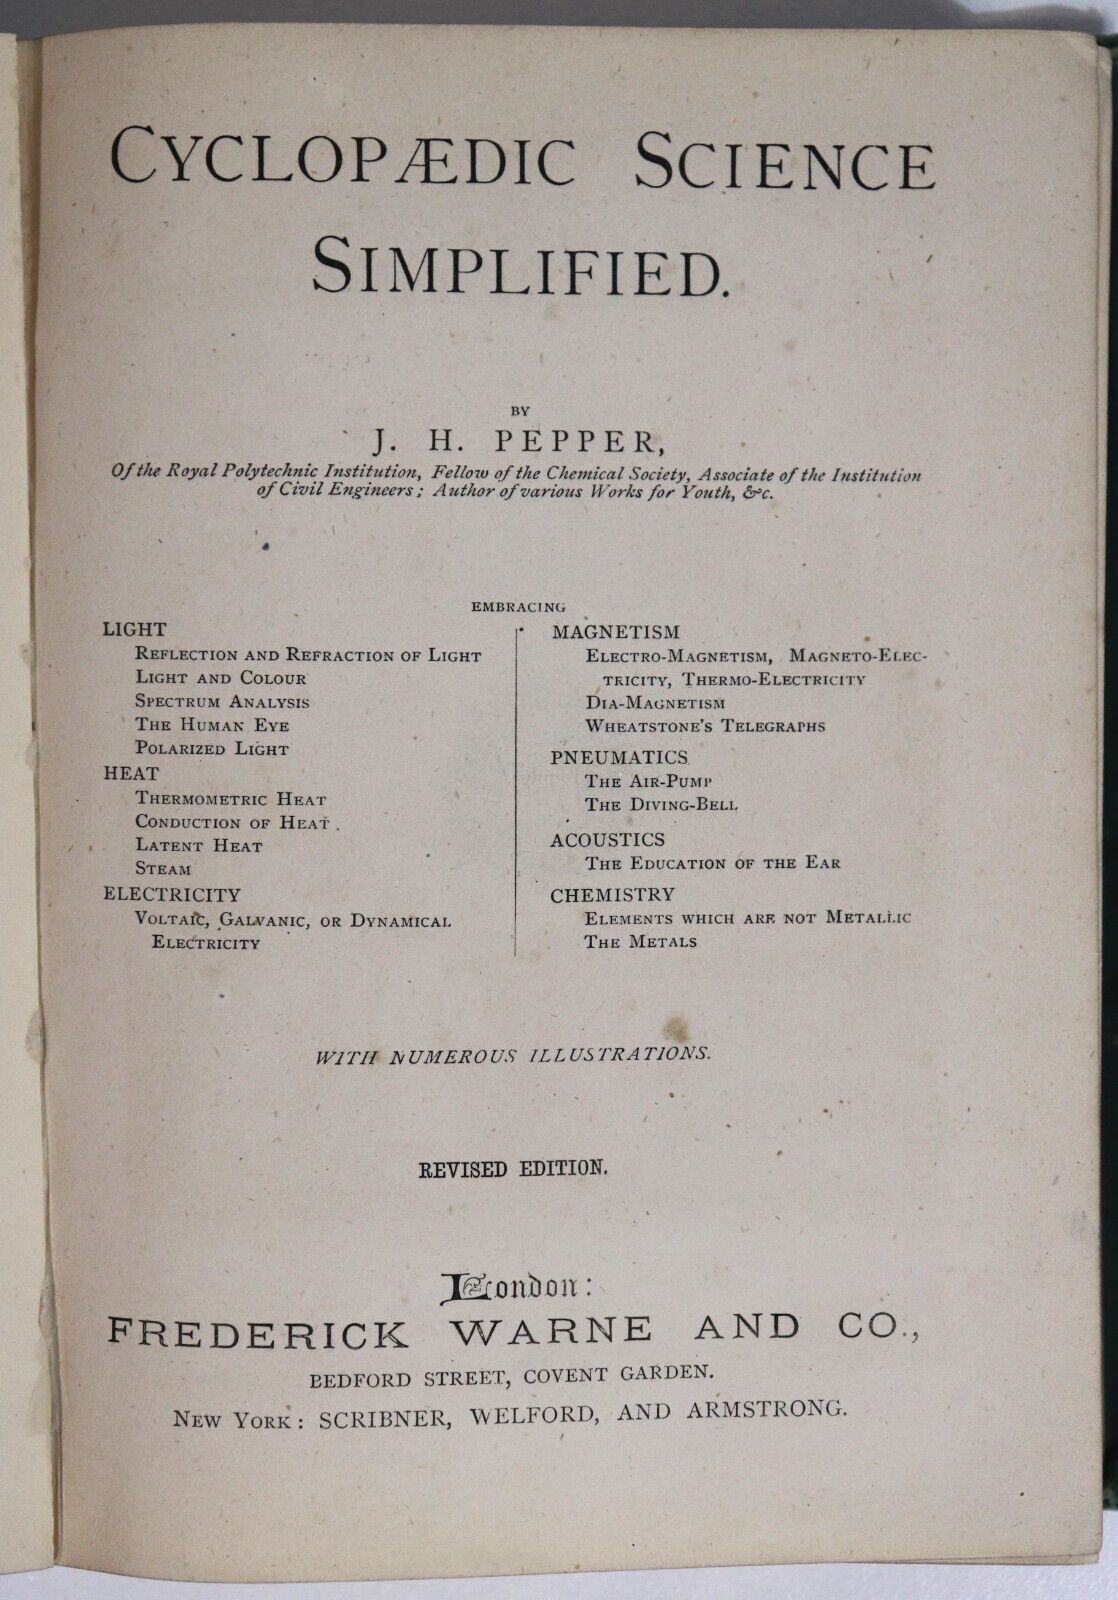 Cyclopaedic Science Simplified by J.H. Pepper - c1875 - Antique Science Book - 0